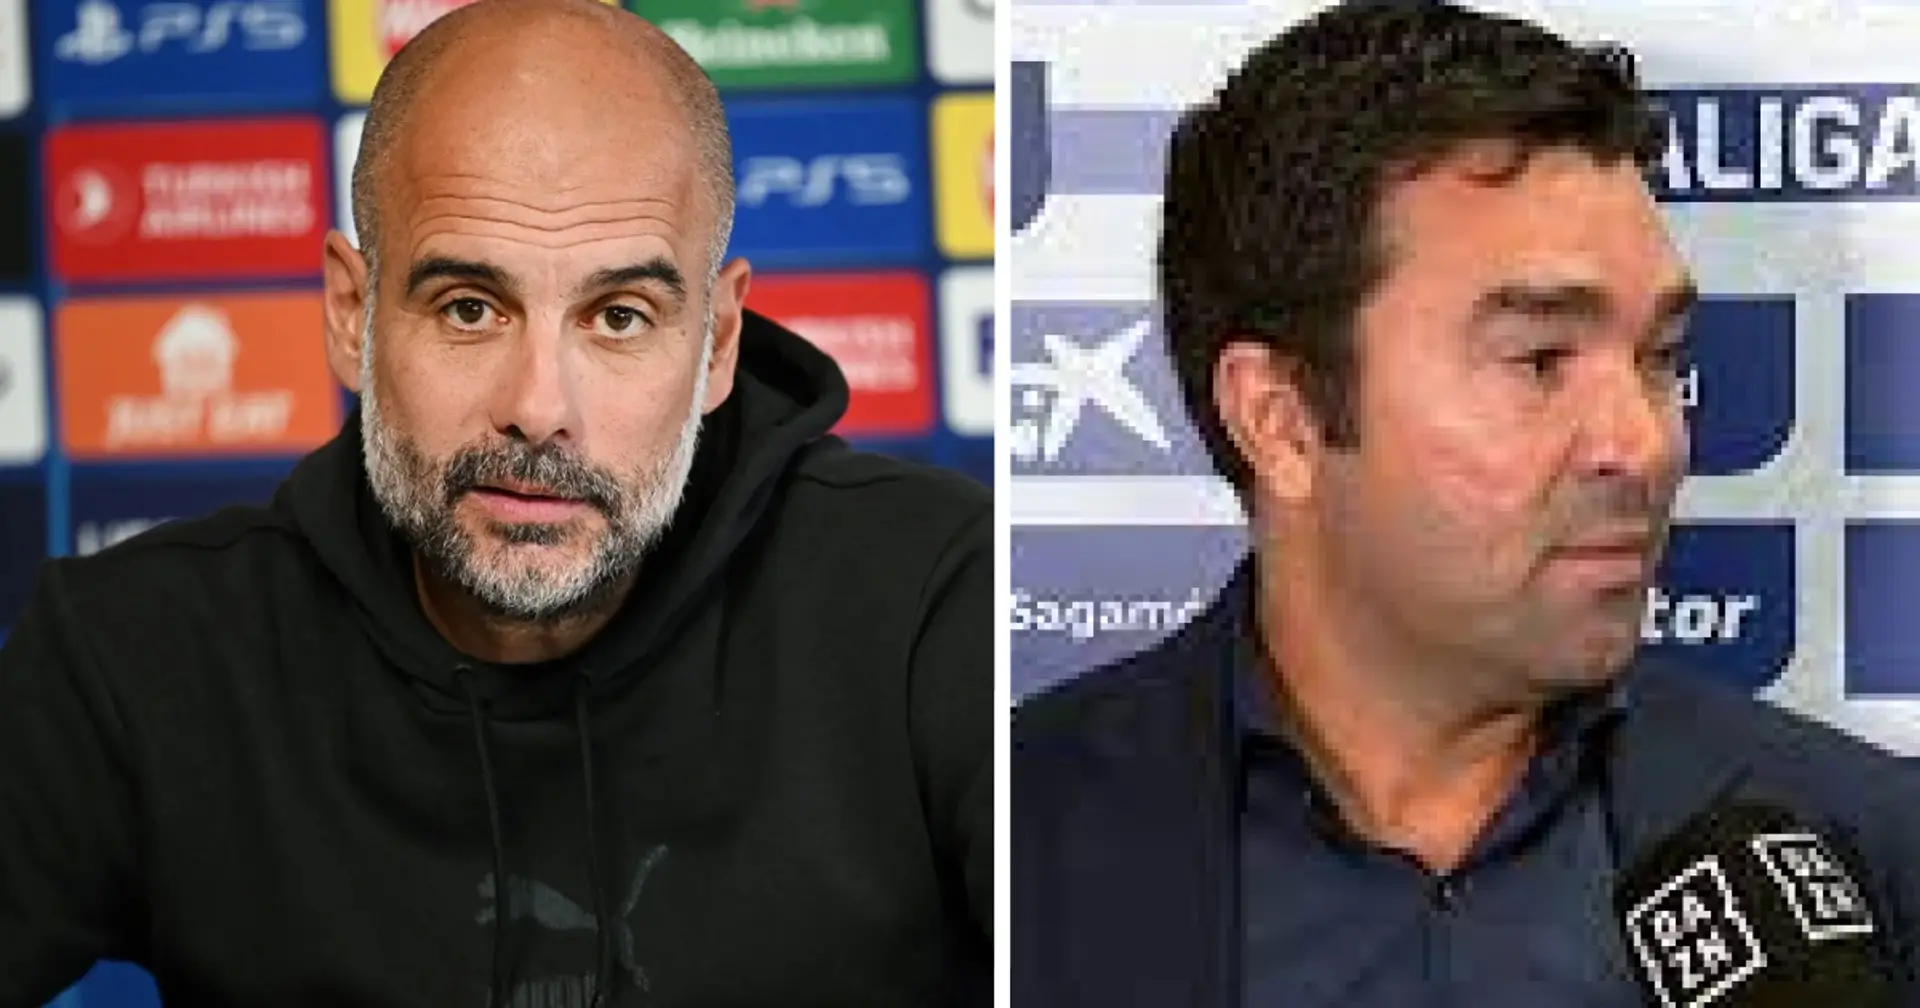 Guardiola's choice for next Barca manager revealed and 2 more big stories you might've missed 